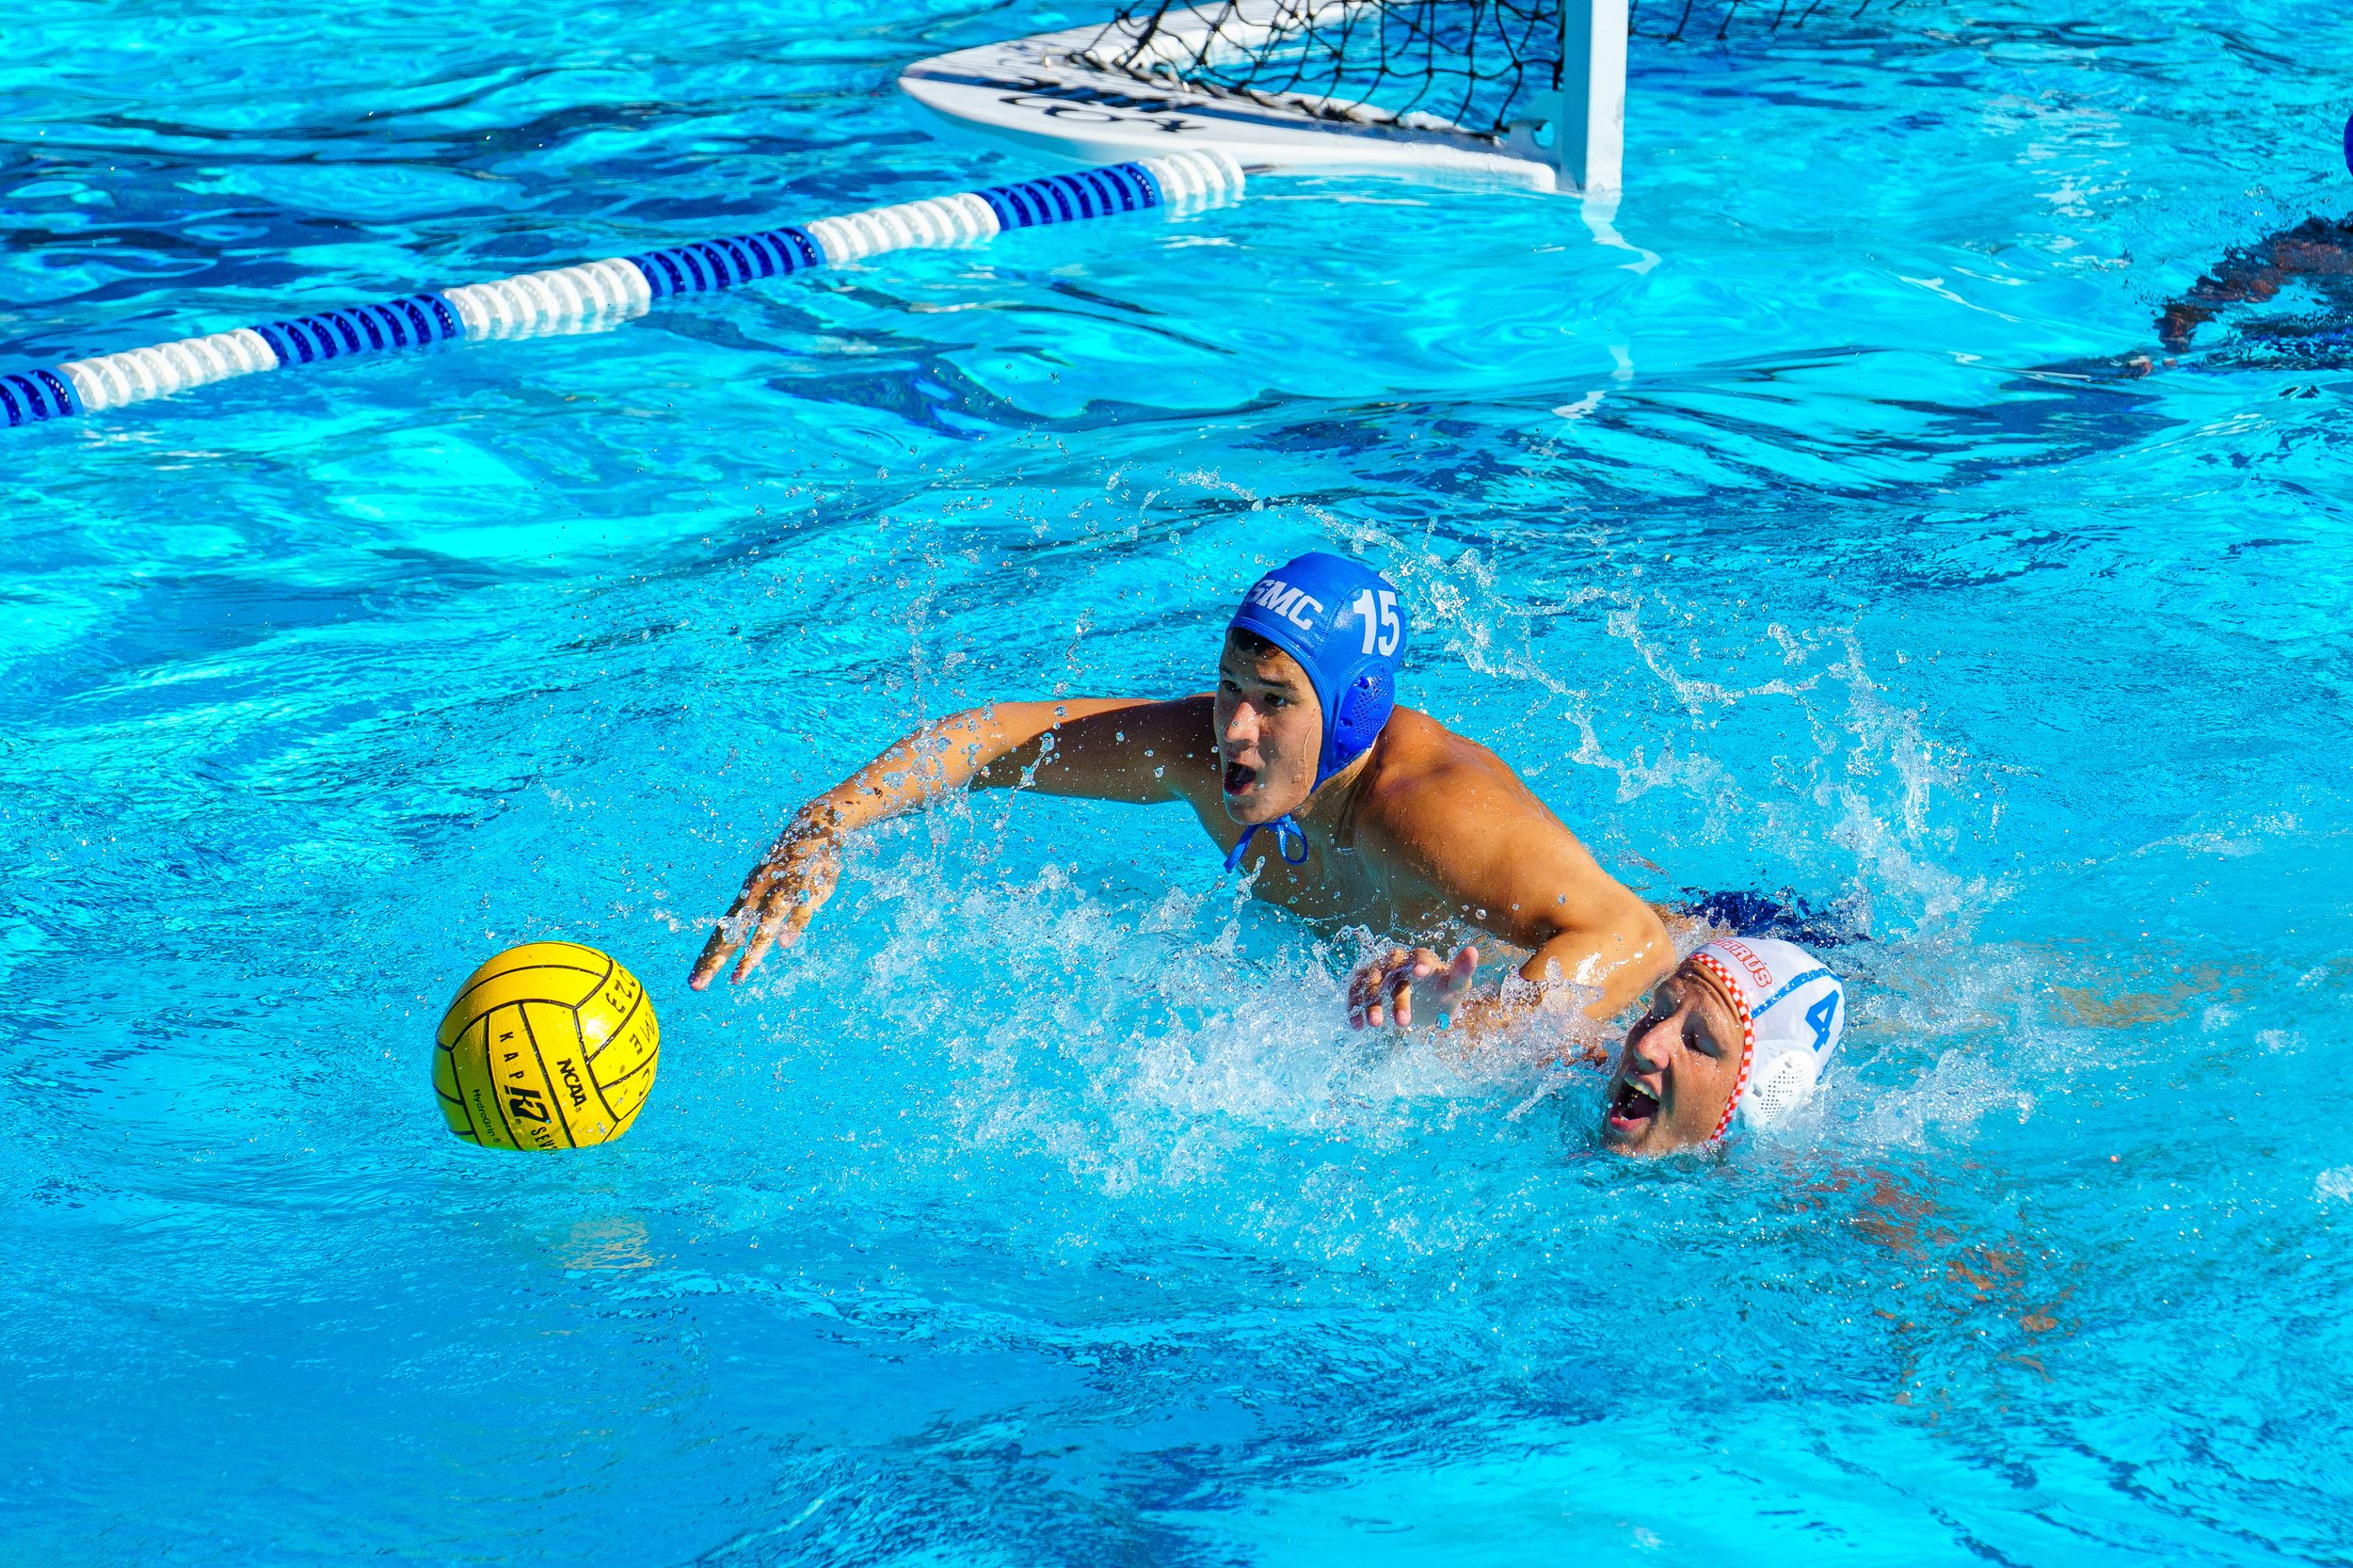  Santa Monica College (SMC) men's water polo utility Ian Zabel (15) leaps to grab the ball against attacker Killian Pressley (4) of the Citrus College Owls, at the SMC water polo conference on Thursday October 5th, 2023 in Santa Monica, Calif. The fi